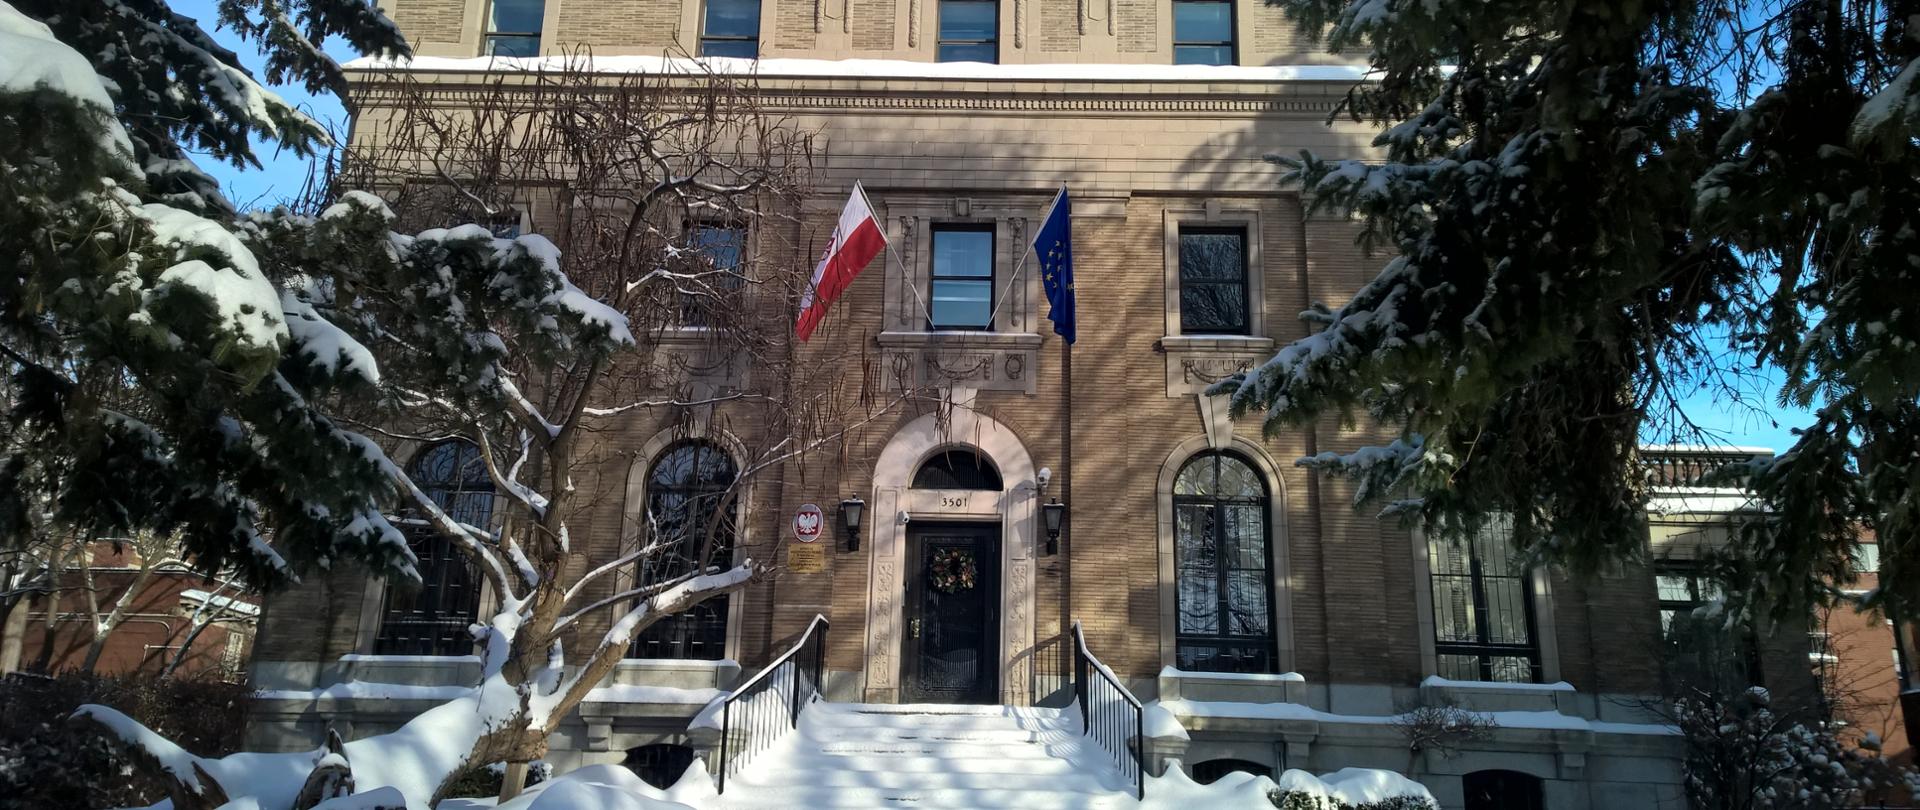 Consulate General of the Republic of Poland in Montreal - winter